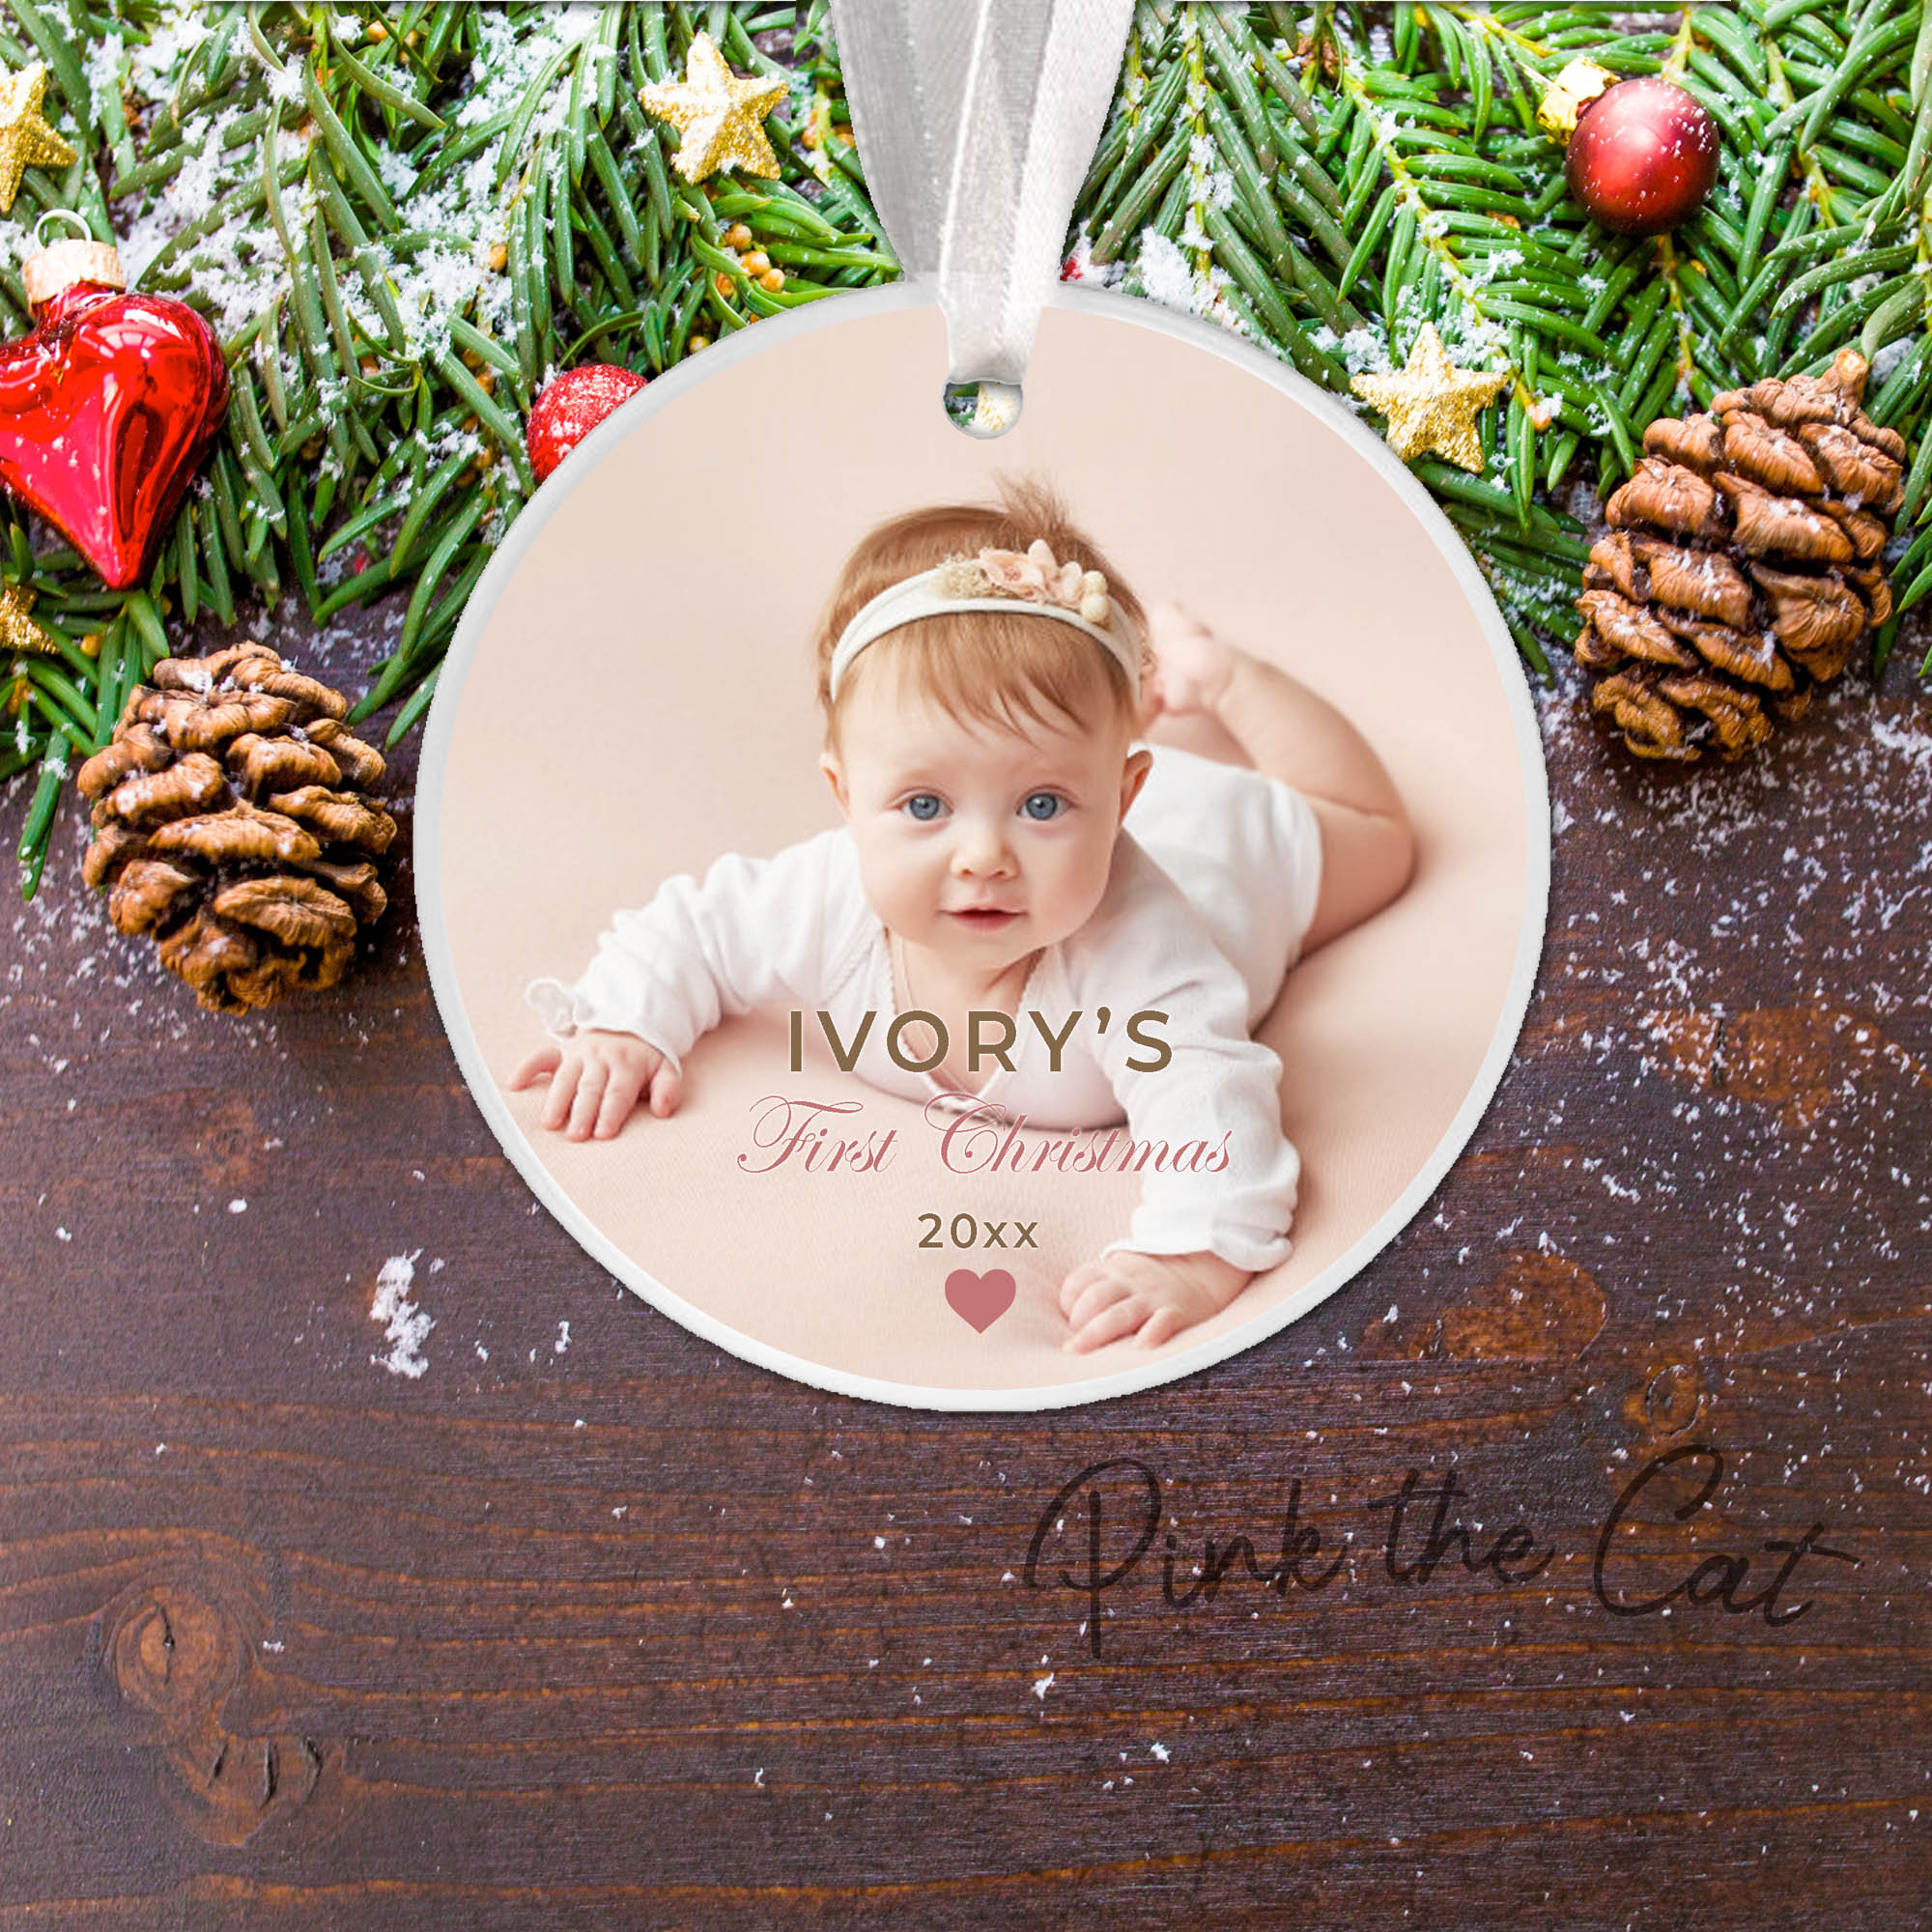 Personalized Christmas ornament with girl photo